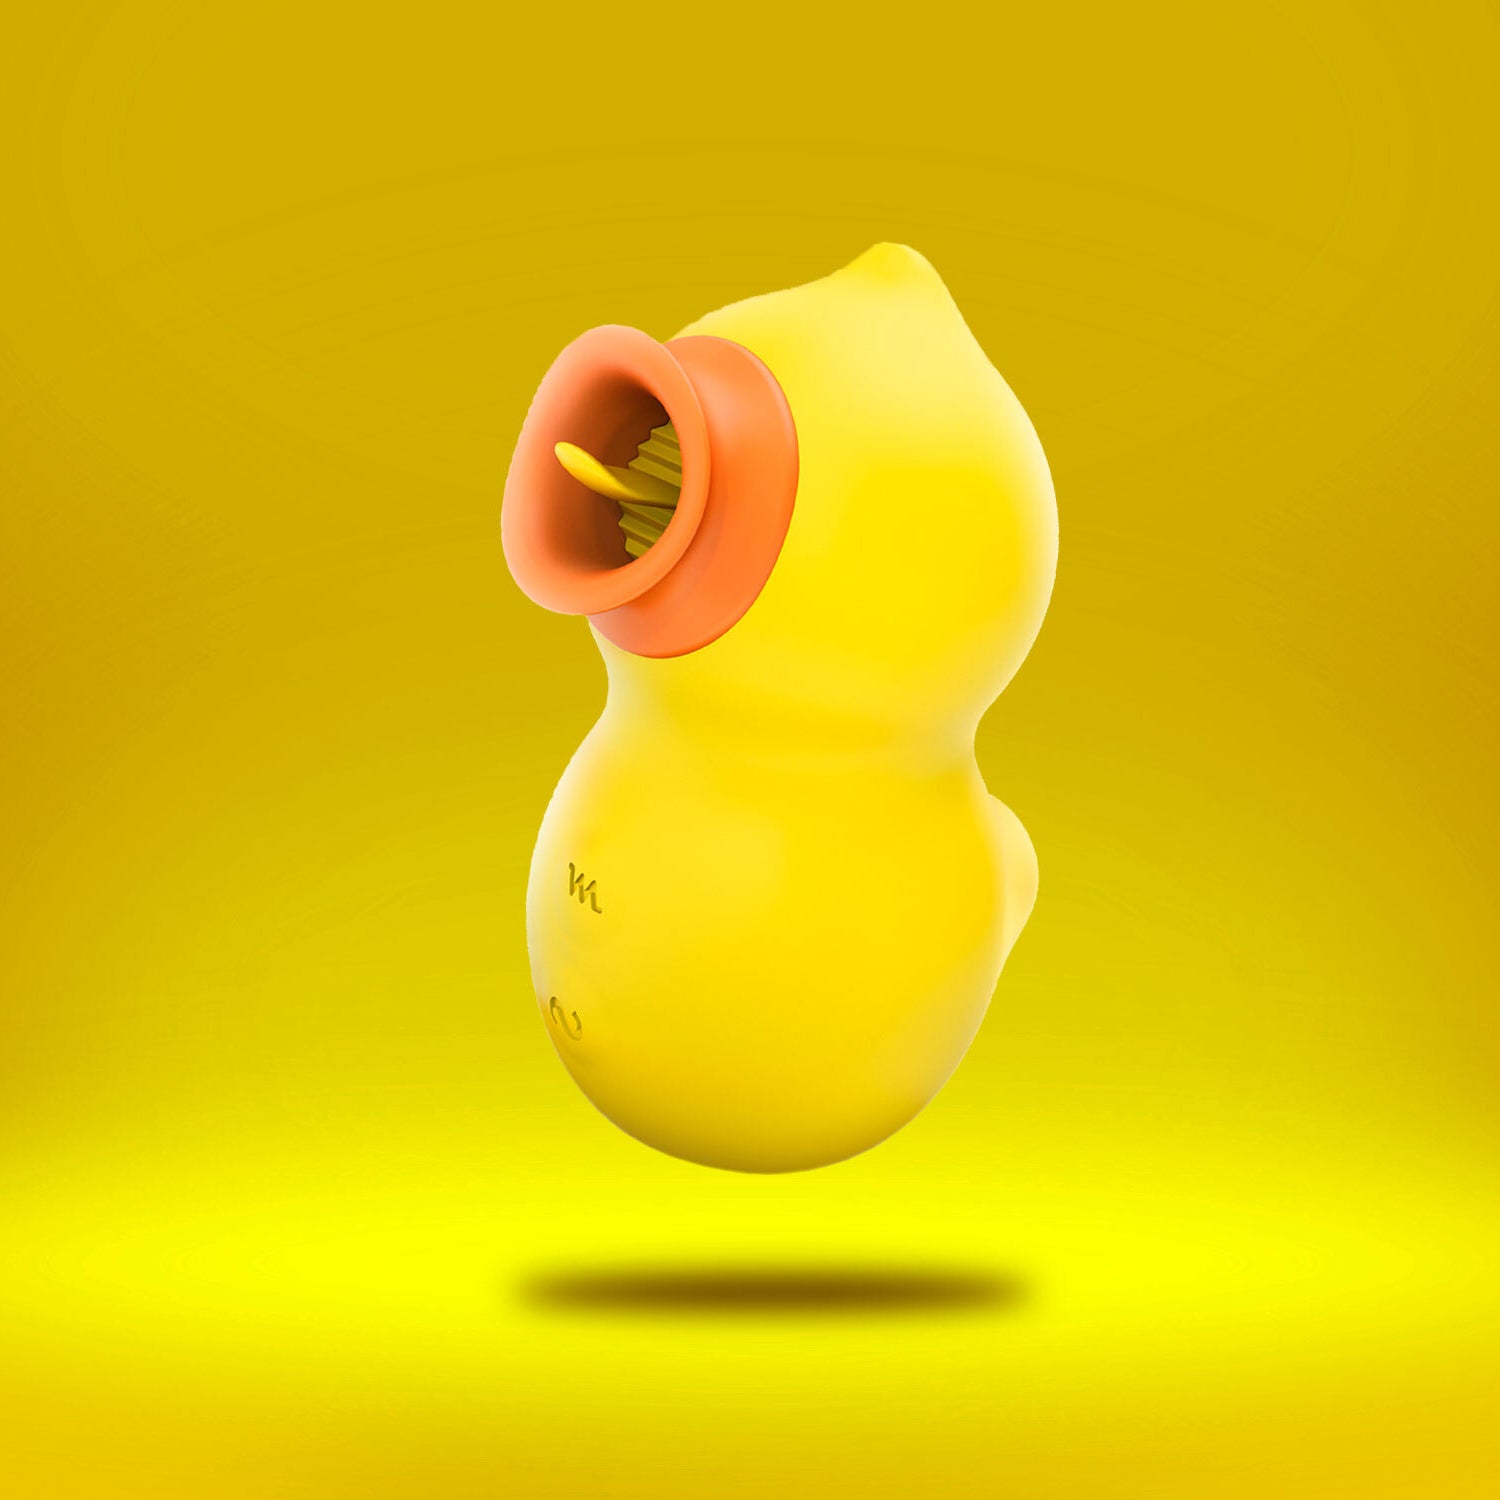 alice tejada recommends rubber duck sex toy pic